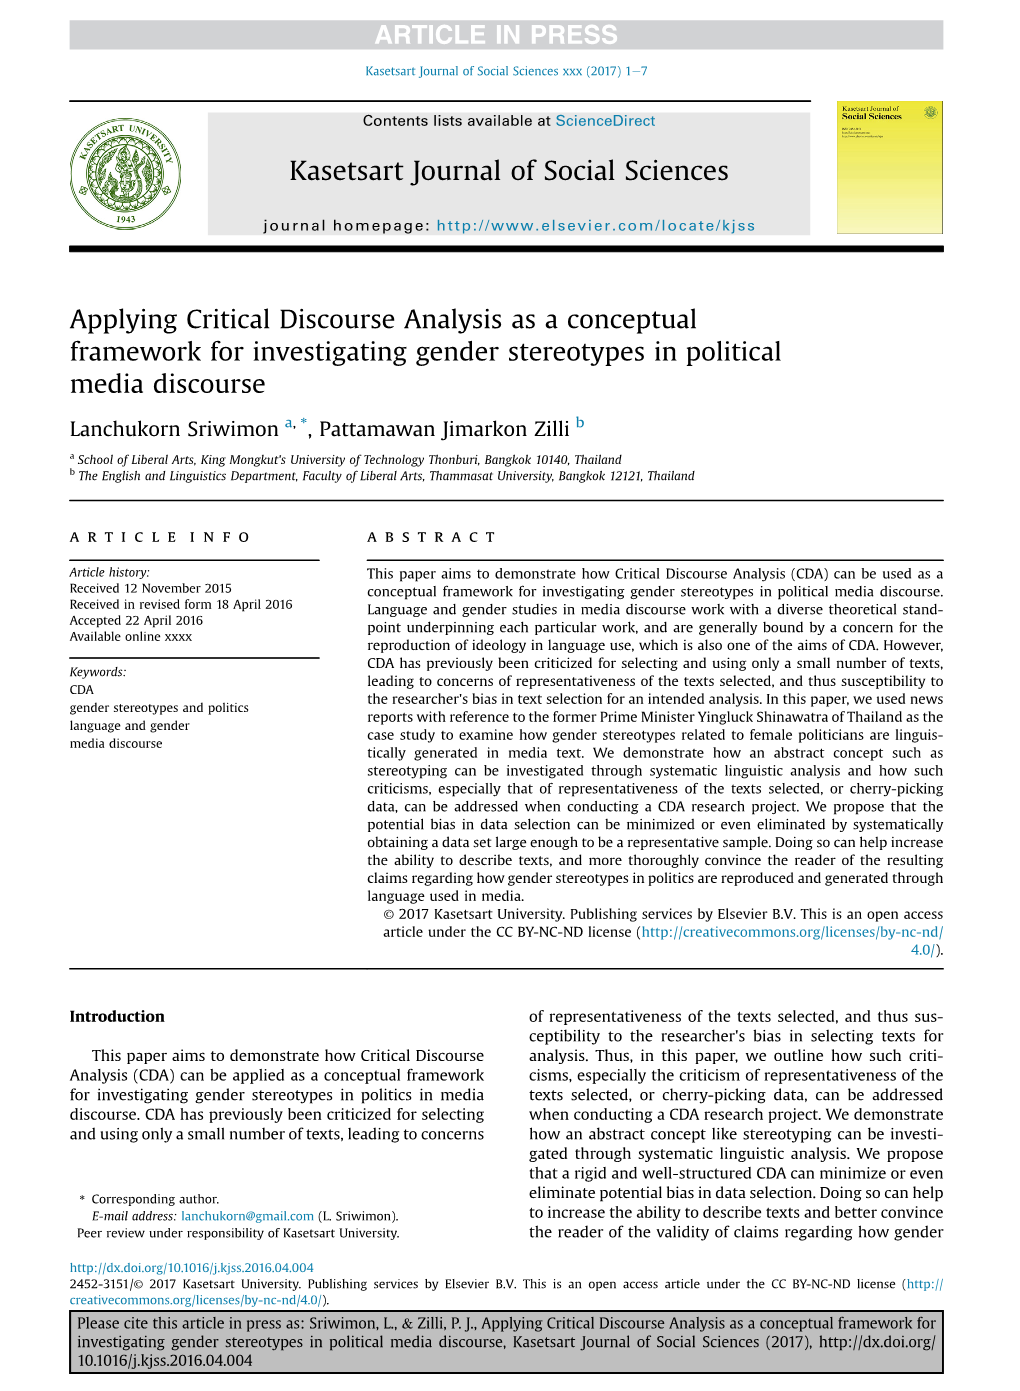 Applying Critical Discourse Analysis As a Conceptual Framework for Investigating Gender Stereotypes in Political Media Discourse